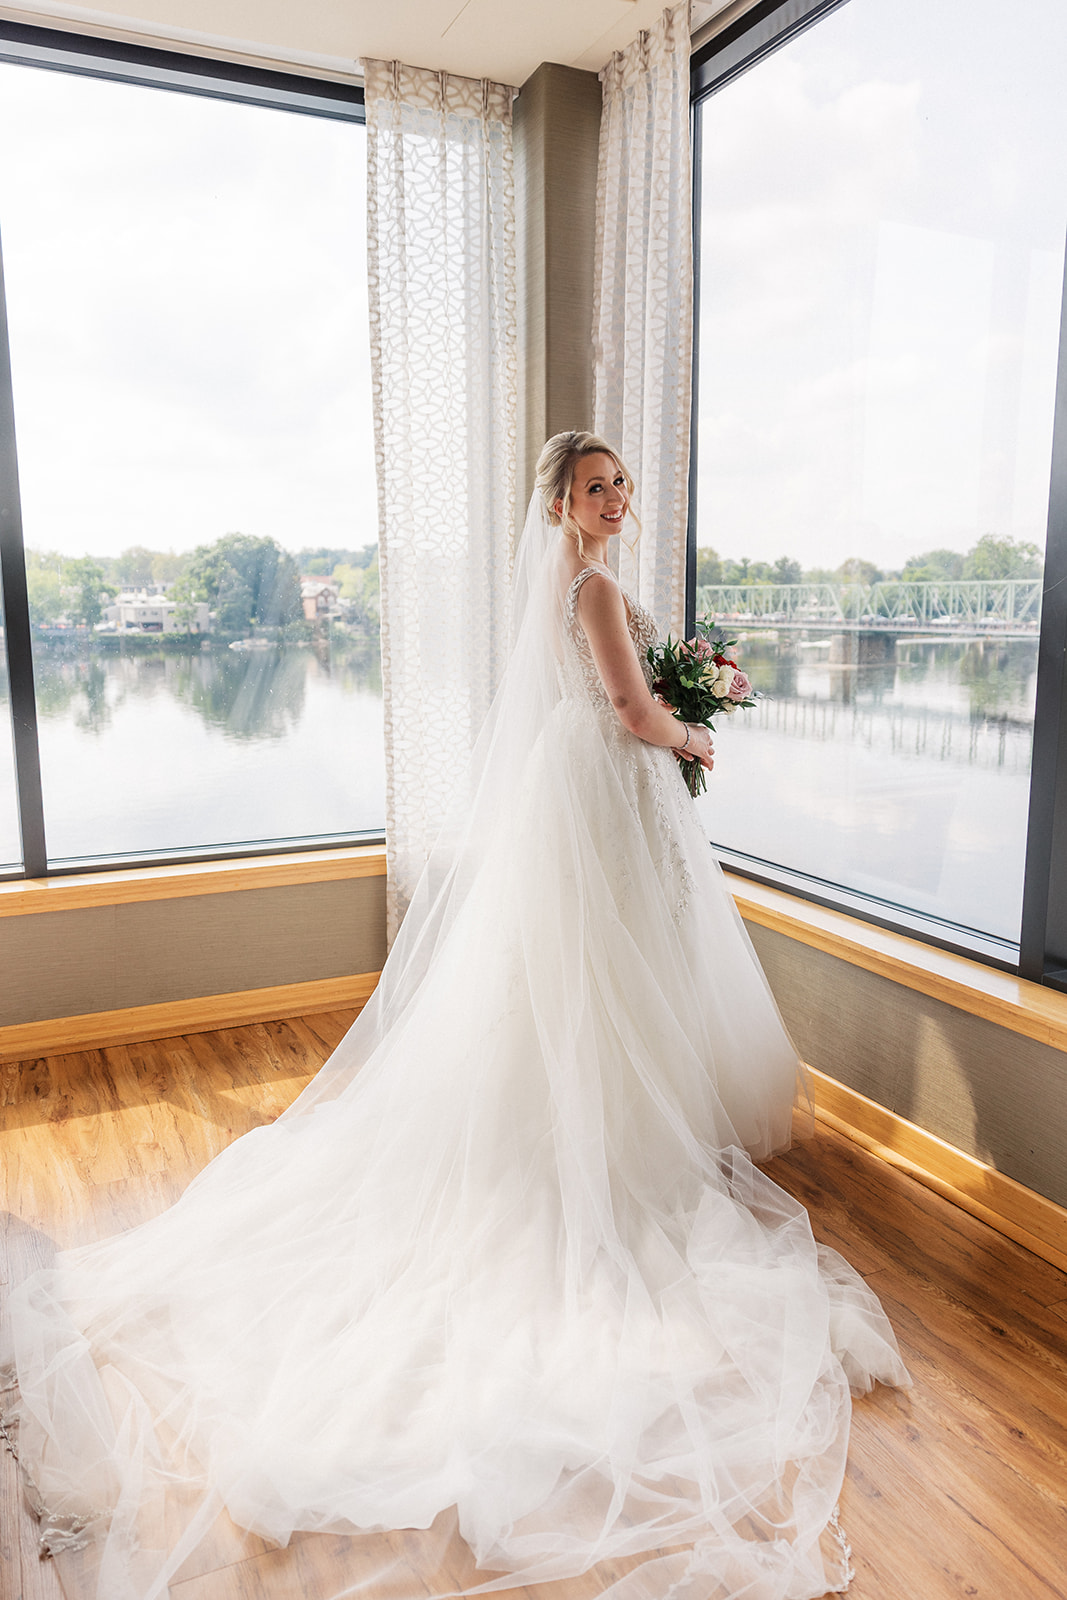 A bride stands in a corner of windows overlooking a river while holding her bouquet at Lambertville Station Wedding venue